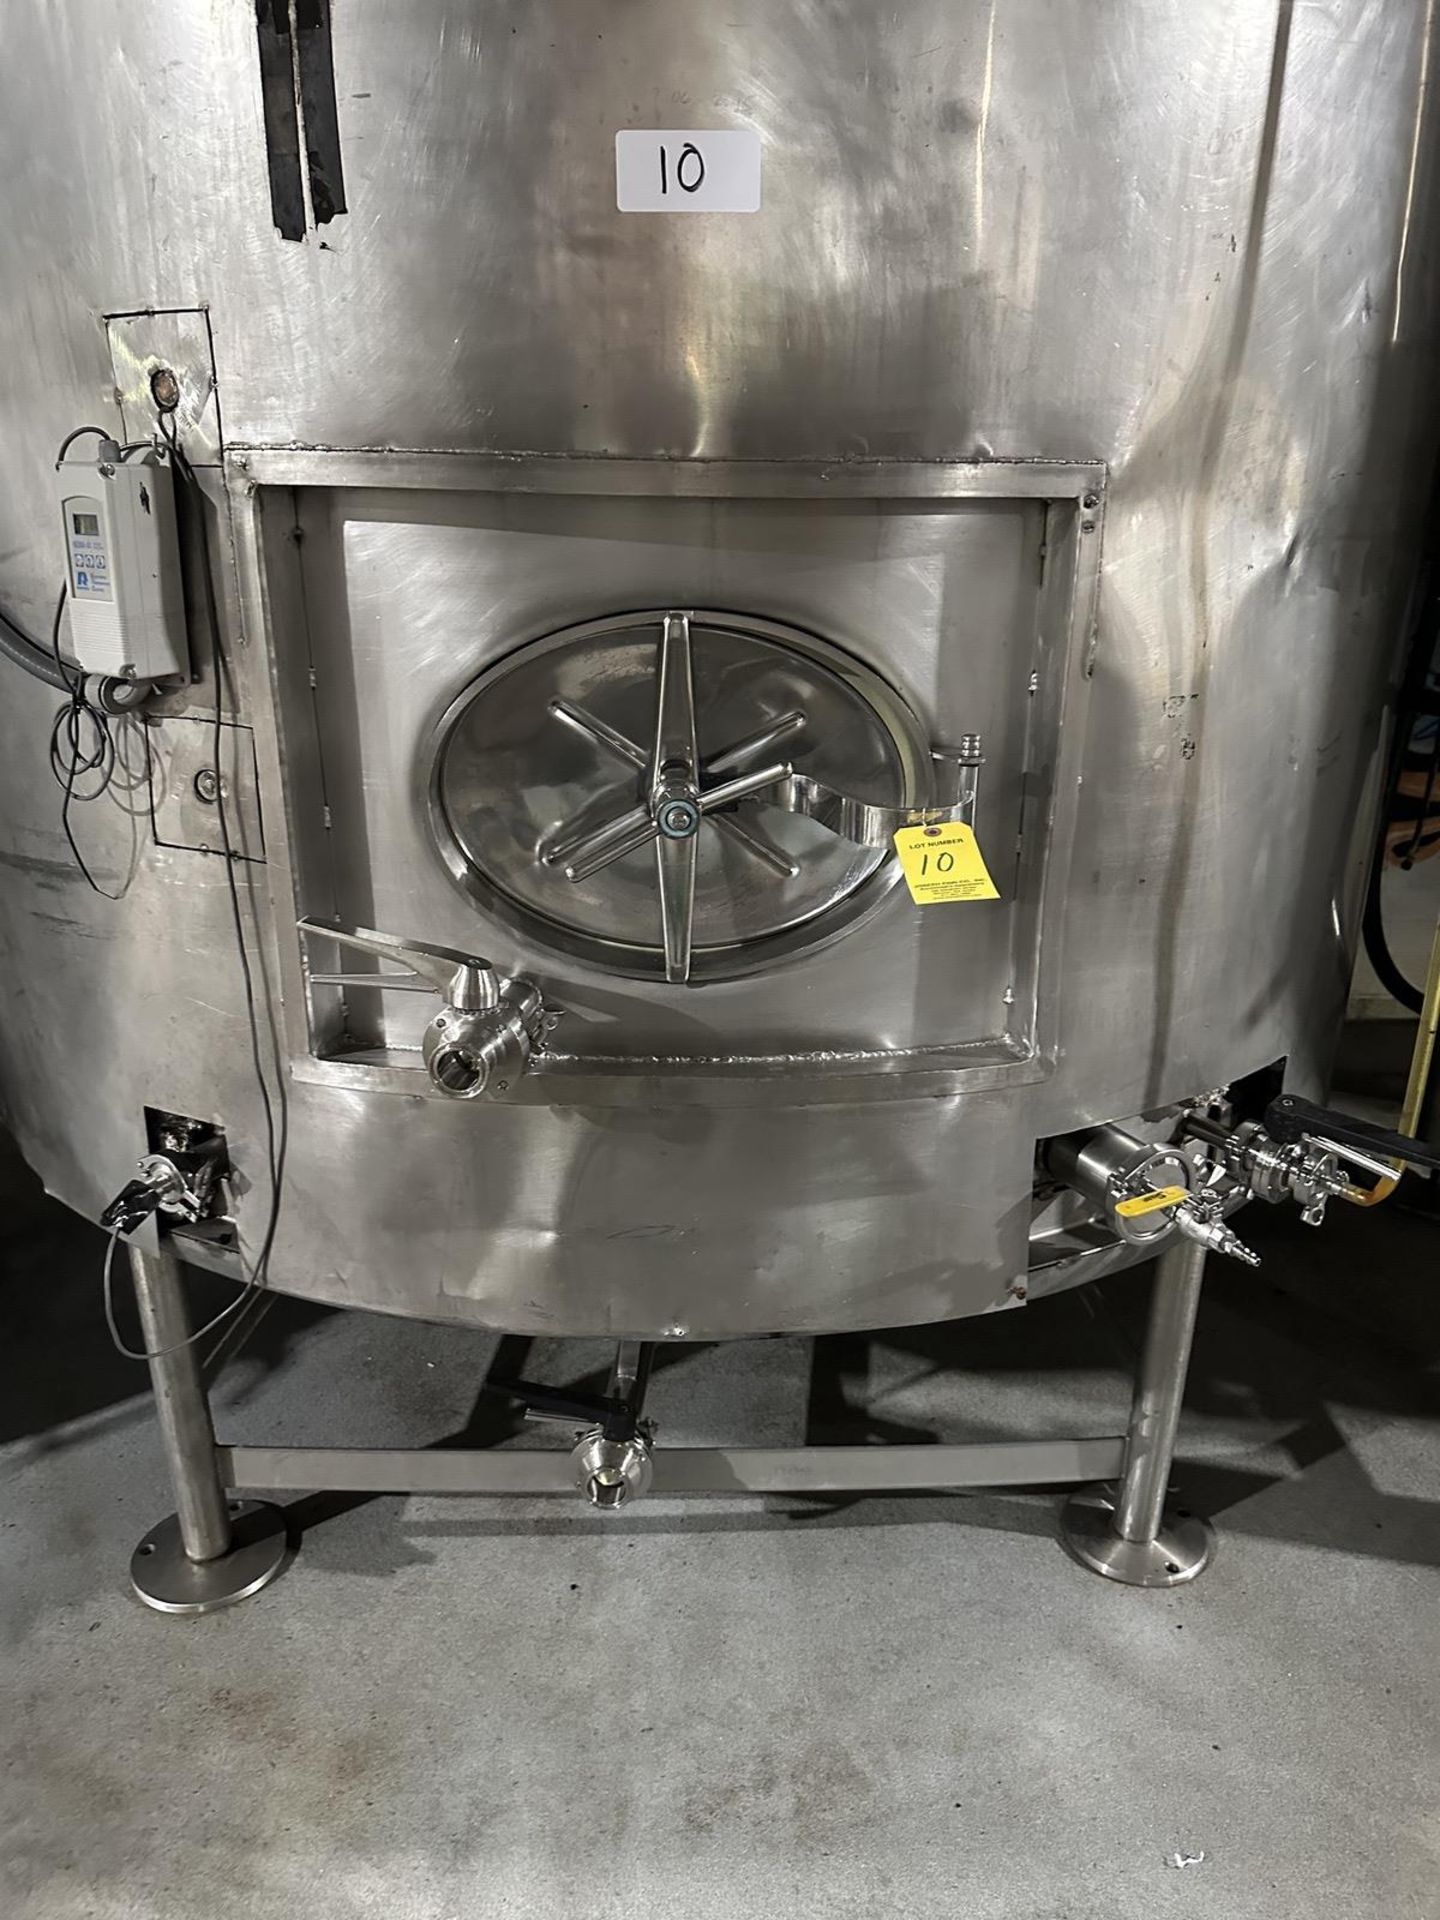 60 BBL Stainless Steel Determination Tank, Glycol Jacketed - Image 3 of 4